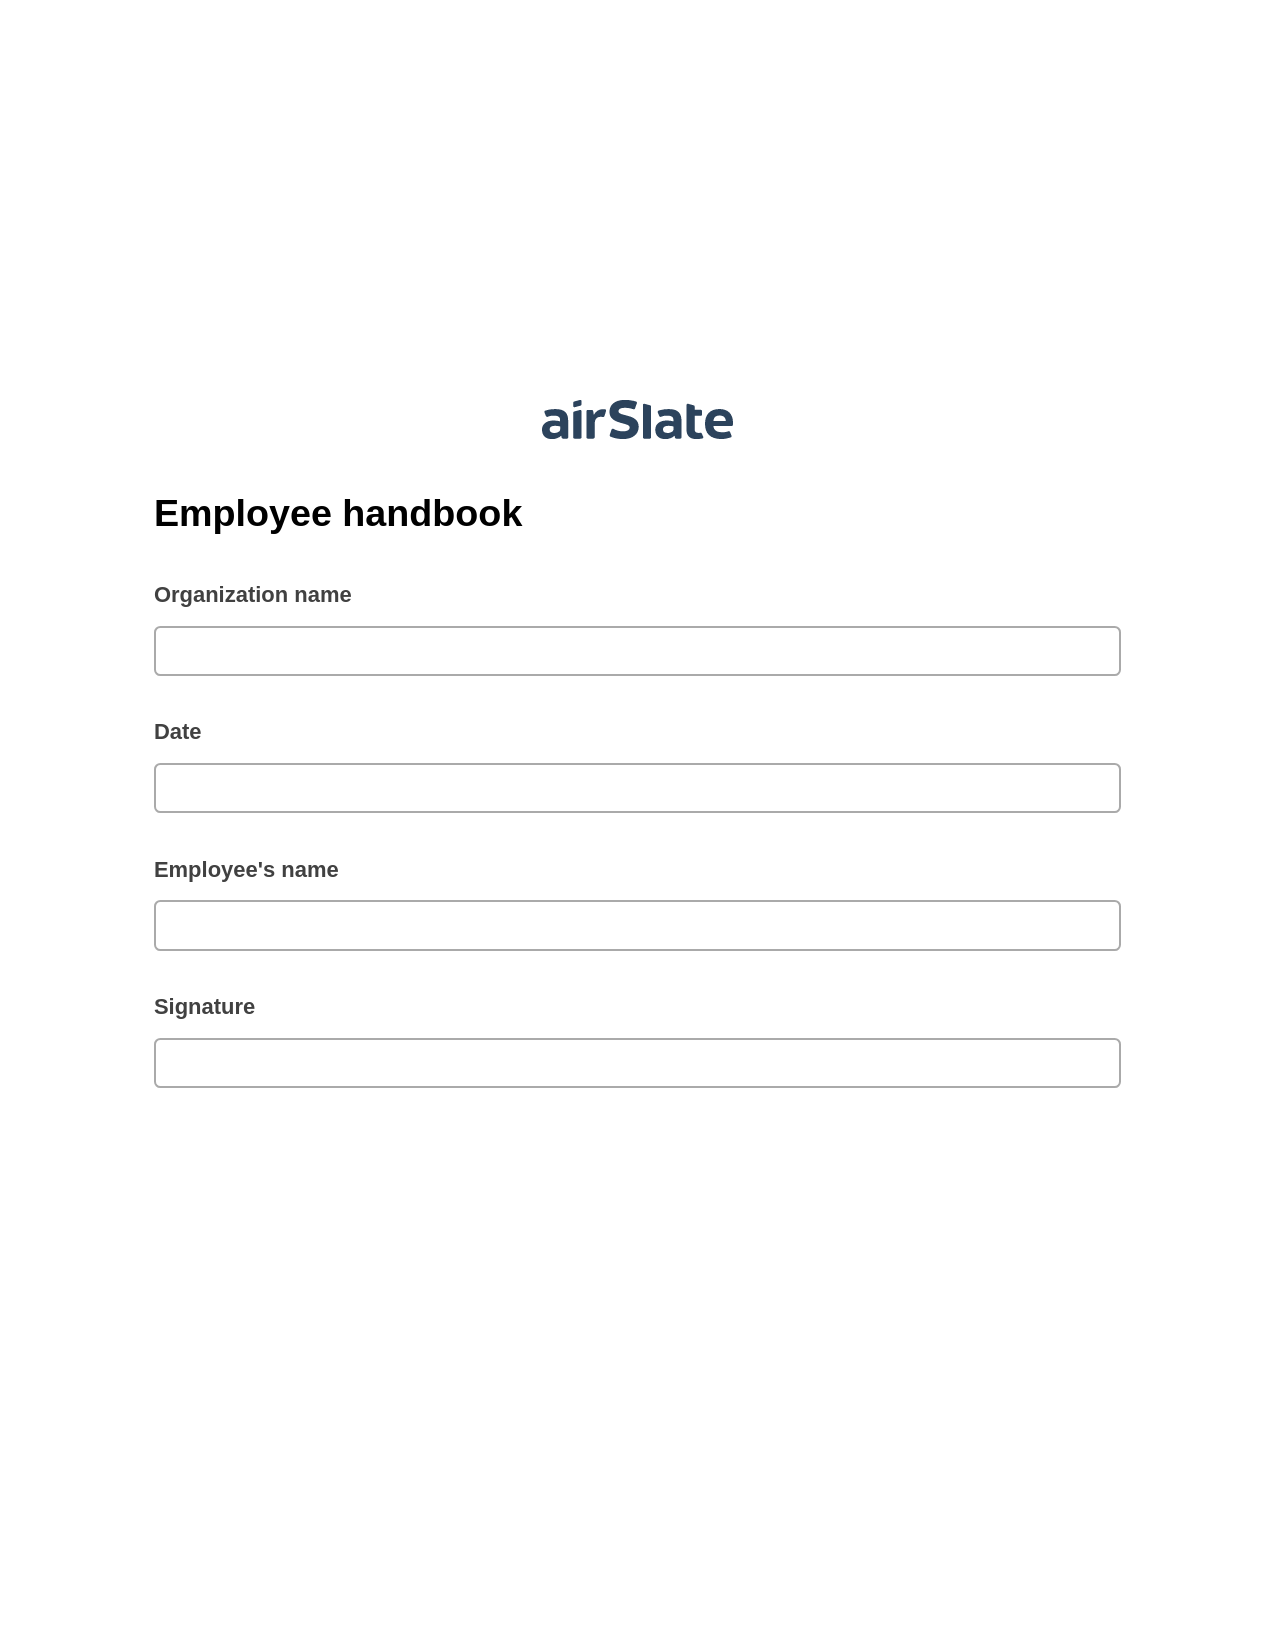 Employee handbook Pre-fill from Google Sheets Bot, Send Mailchimp Campaign Bot, Export to Excel 365 Bot